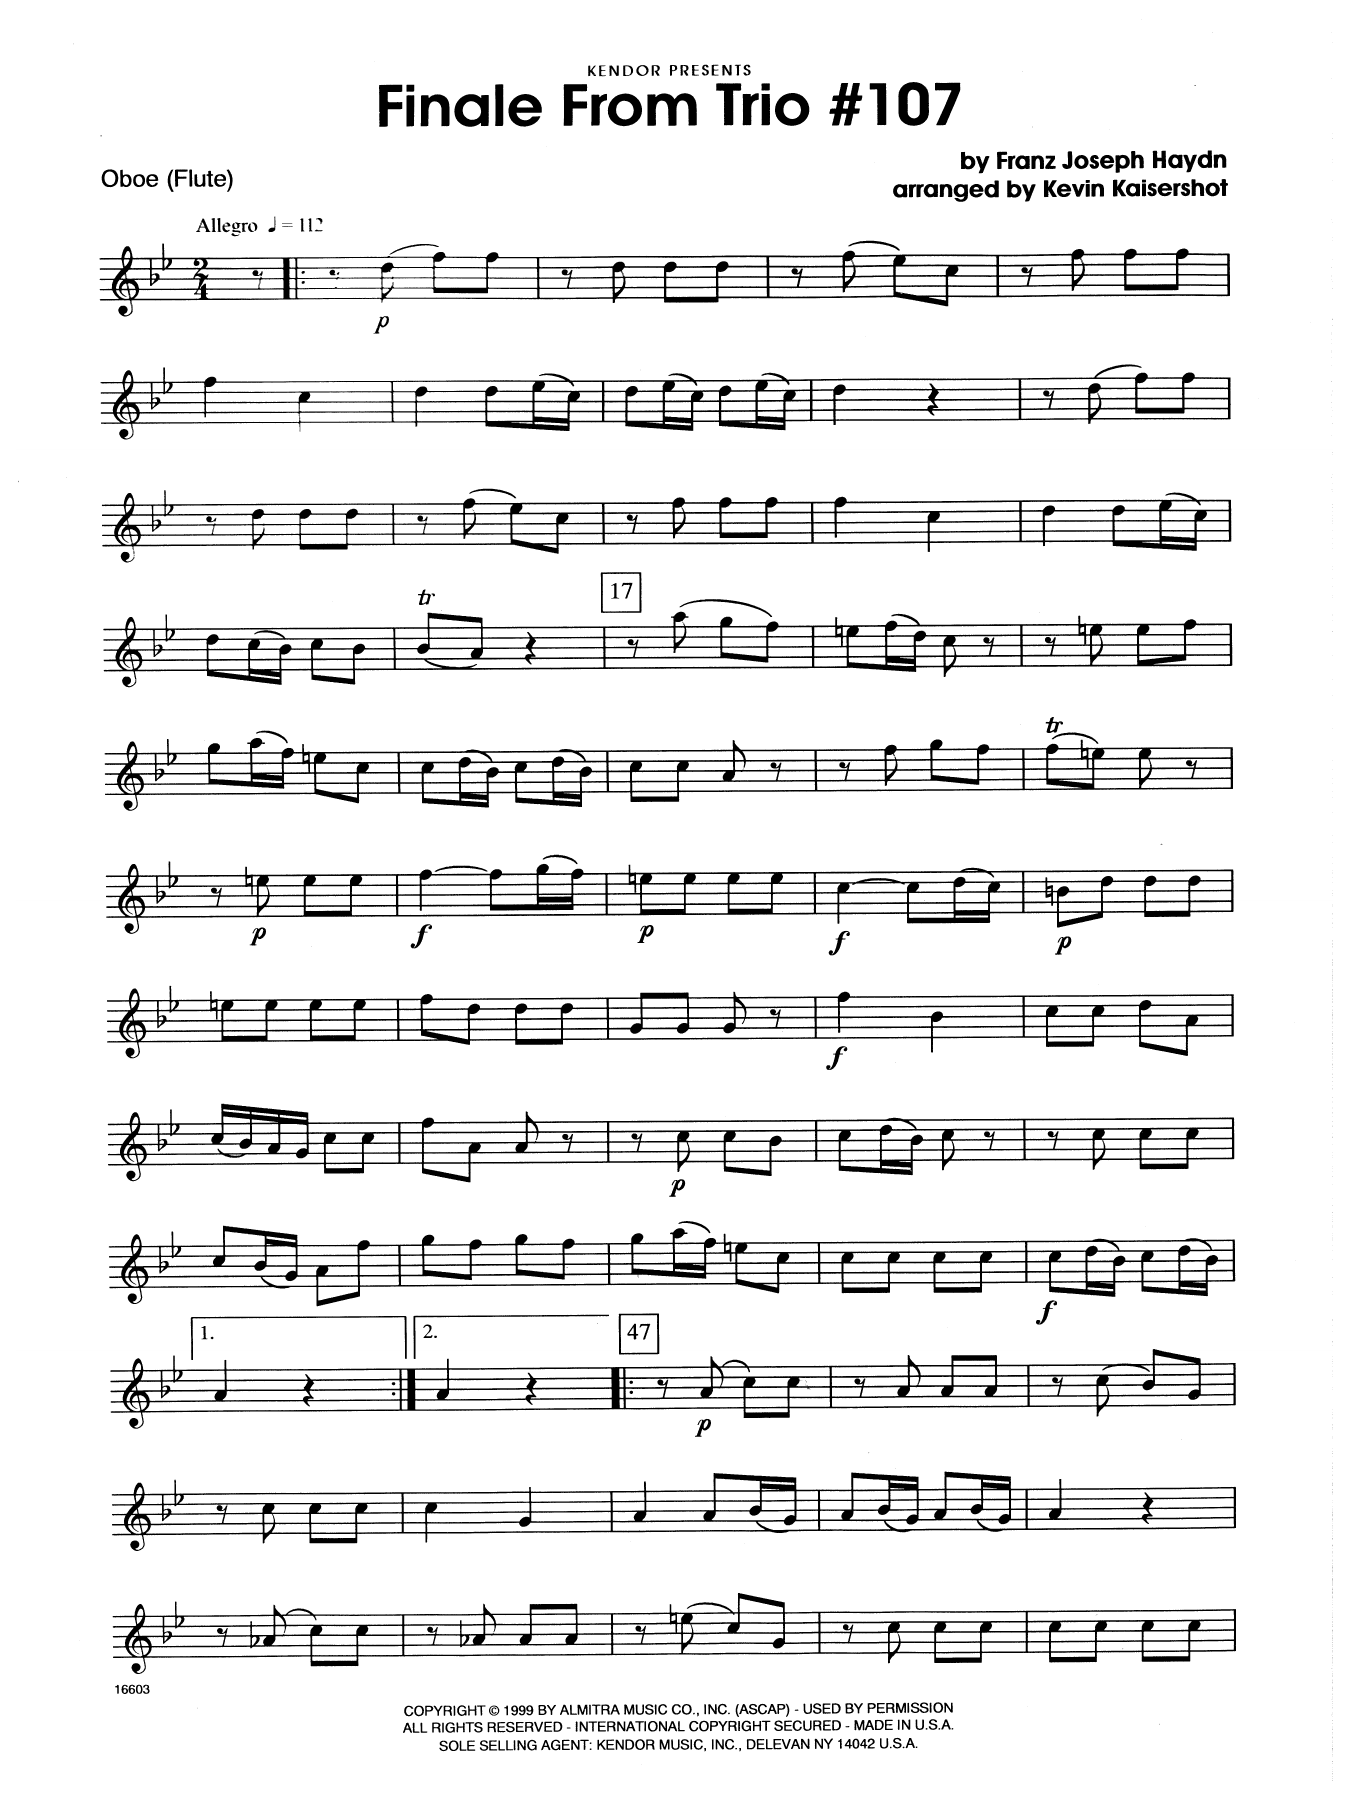 Download Kevin Kaisershot Finale From Trio #107 - Oboe Sheet Music